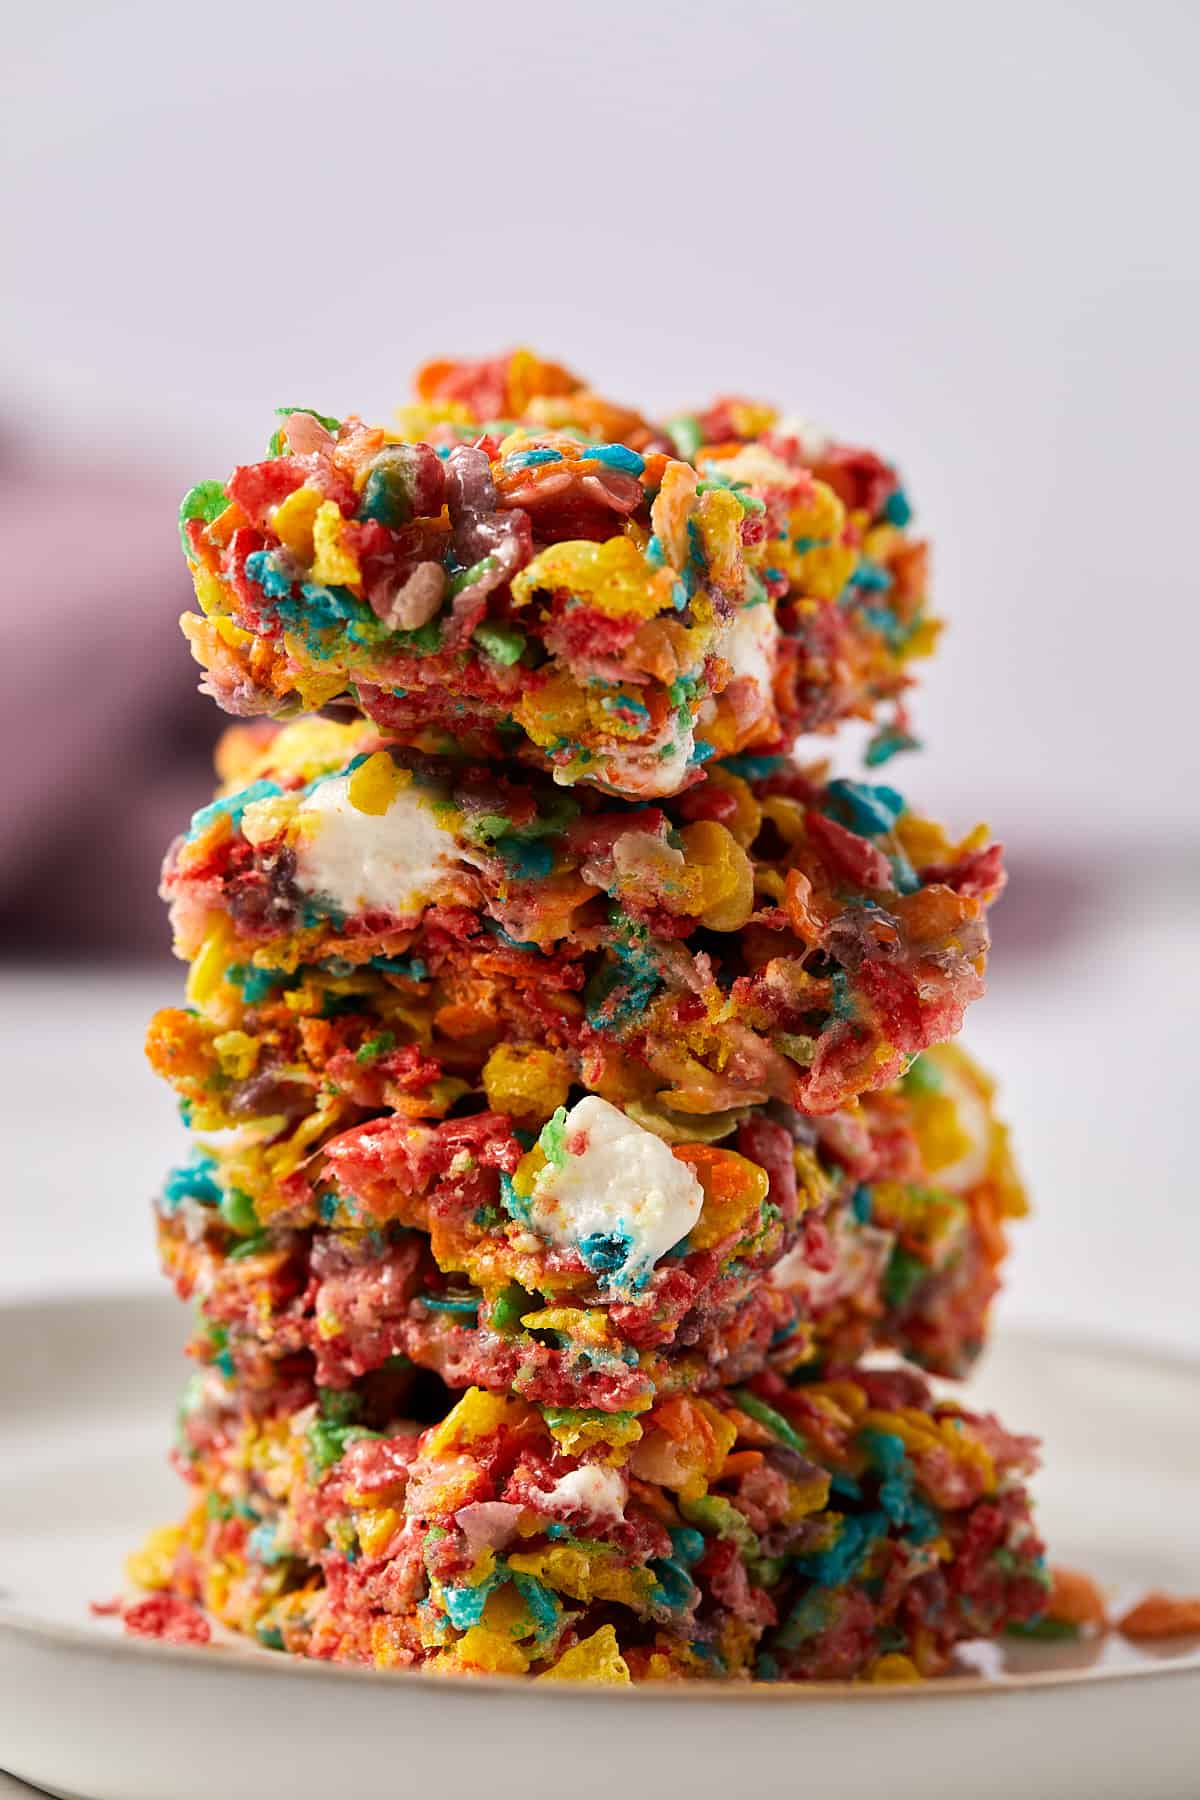 A close up view of a stack of fruity pebbles marshmallow treats.